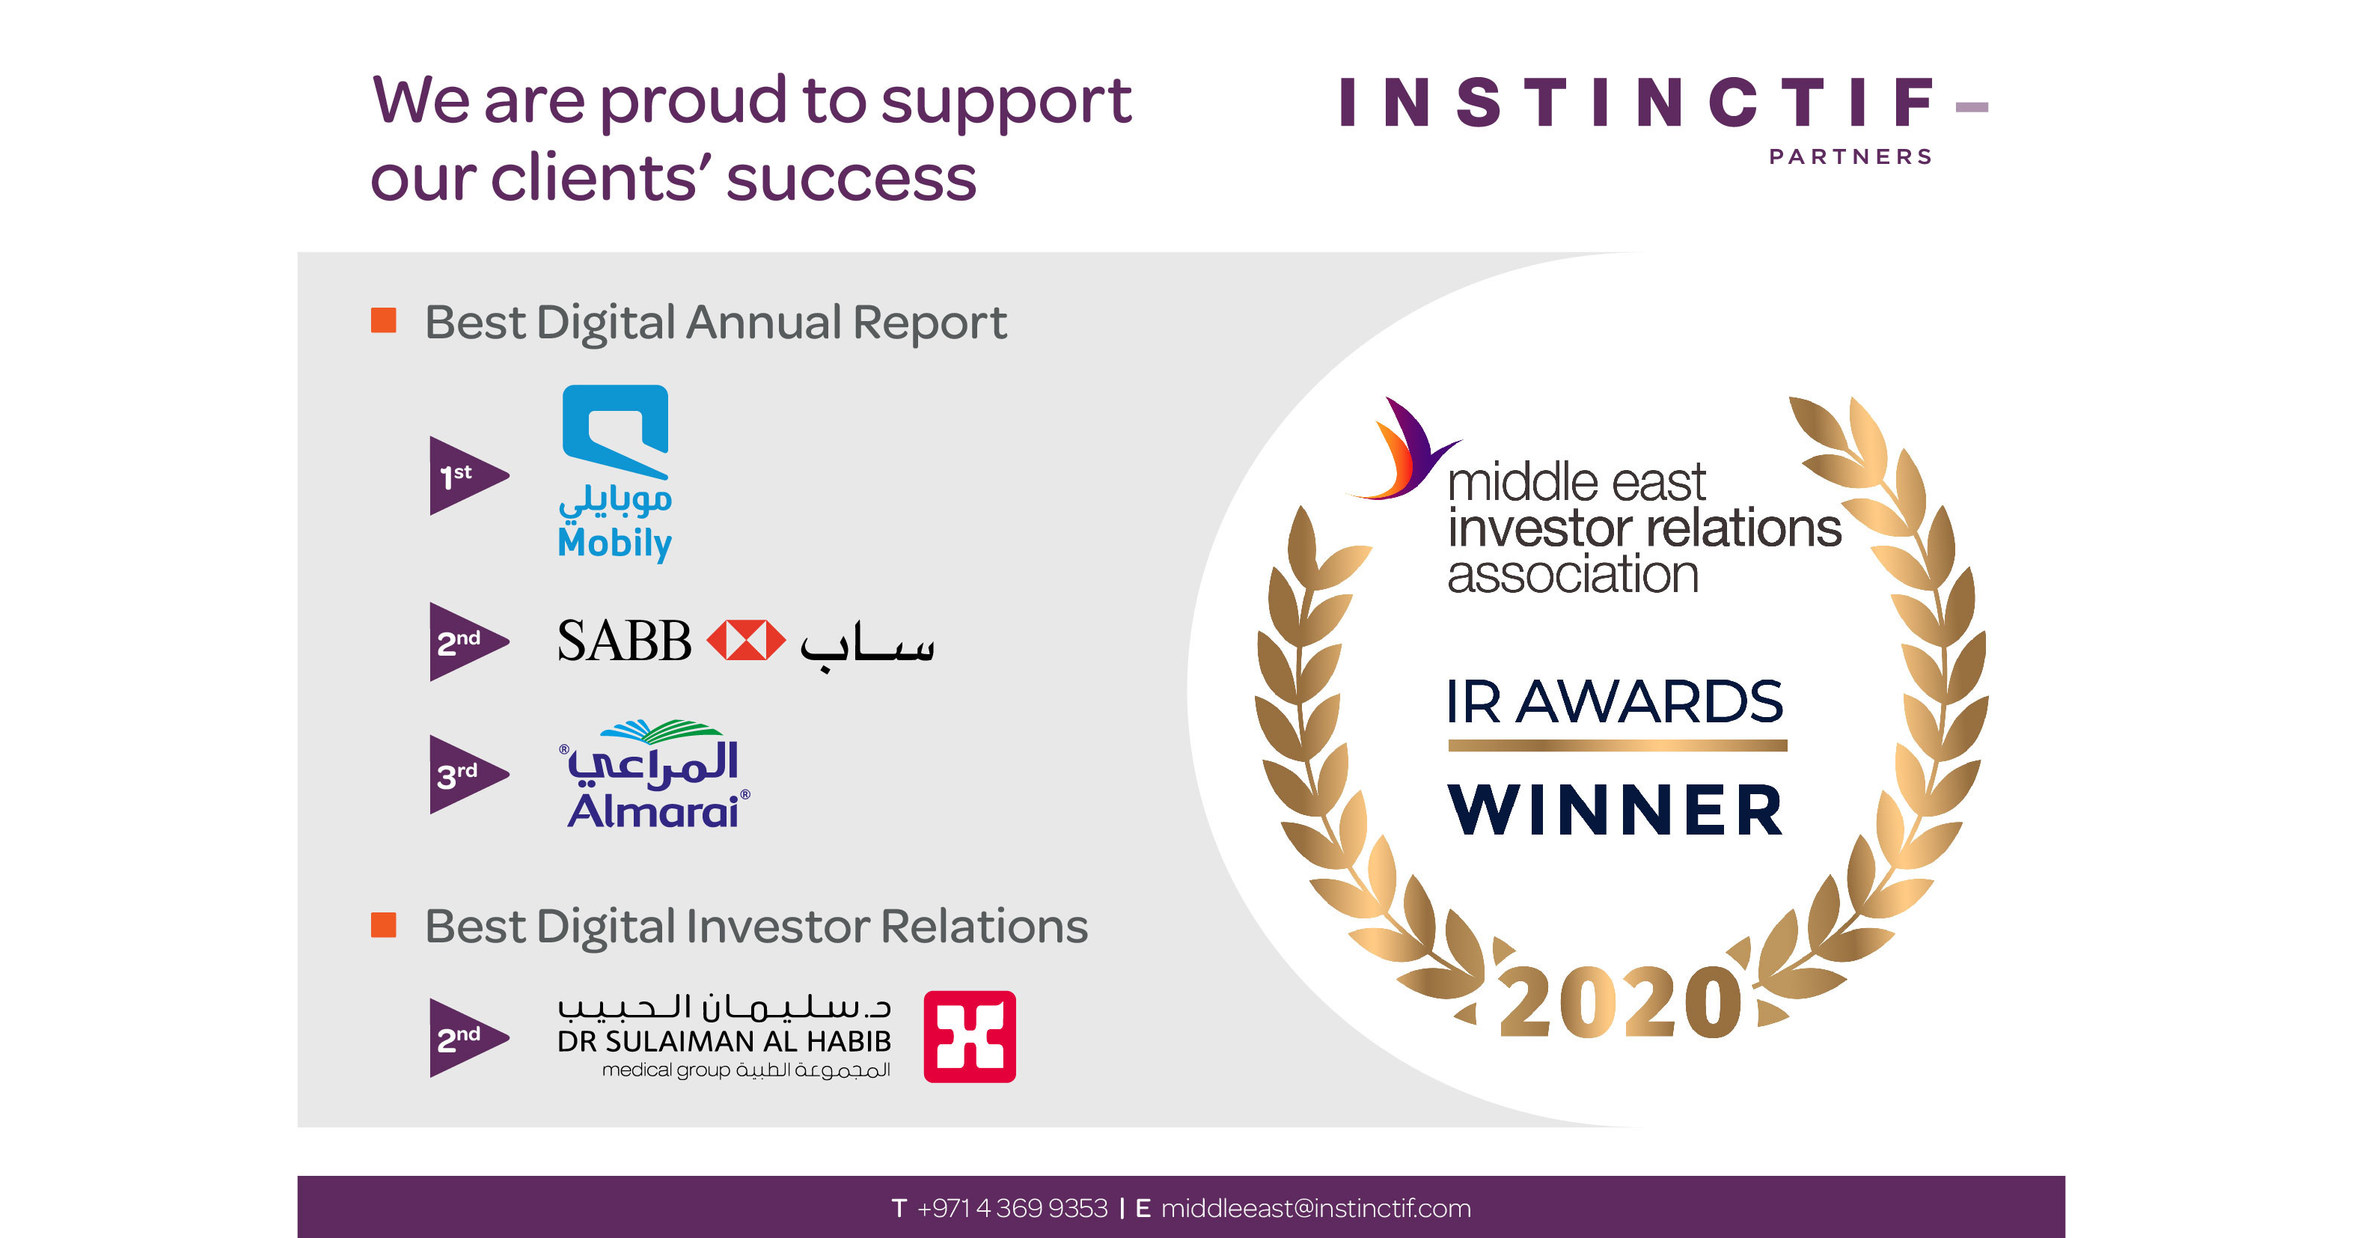 Instinctif Partners’ clients dominate MEIRA’s digital award categories with prizes to Mobily, SABB, Almarai and Habib Medical Group